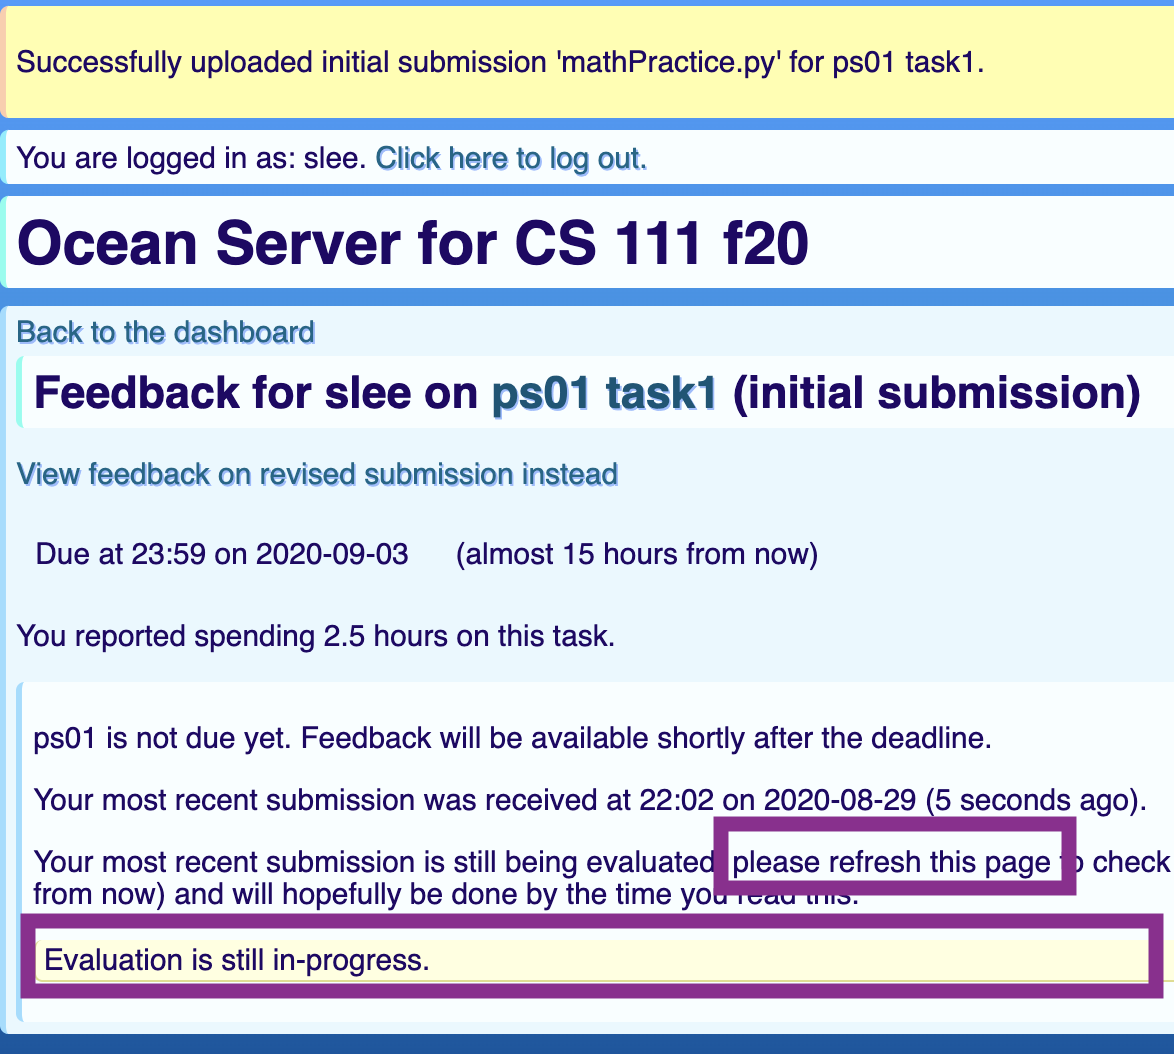 The feedback view. At the very top, there may be one or more messages about your most recent operation, for example confirming a successful upload. After that is the same login information from the original page, and then after the title, a 'Back to the dashboard' link that will take you back to the previous screen. A sub-title includes links for the problem set and task descriptions, and there may be a link offering to view feedback on a revised (or initial) submission instead of the one you're currently viewing. Next comes information about the deadline for the task you're viewing, and then information about how much time you reported spending. After all of that the actual feedback starts. It has several paragraphs describing the state of things, depending on whether or not you've submitted anything, whether feedback is available or not, and whether any errors have occurred. There will be a final list of messages, which in this case is just a single message indicating that evaluation of your submission is still in-progress. When feedback is available, it will be shown after the messages.